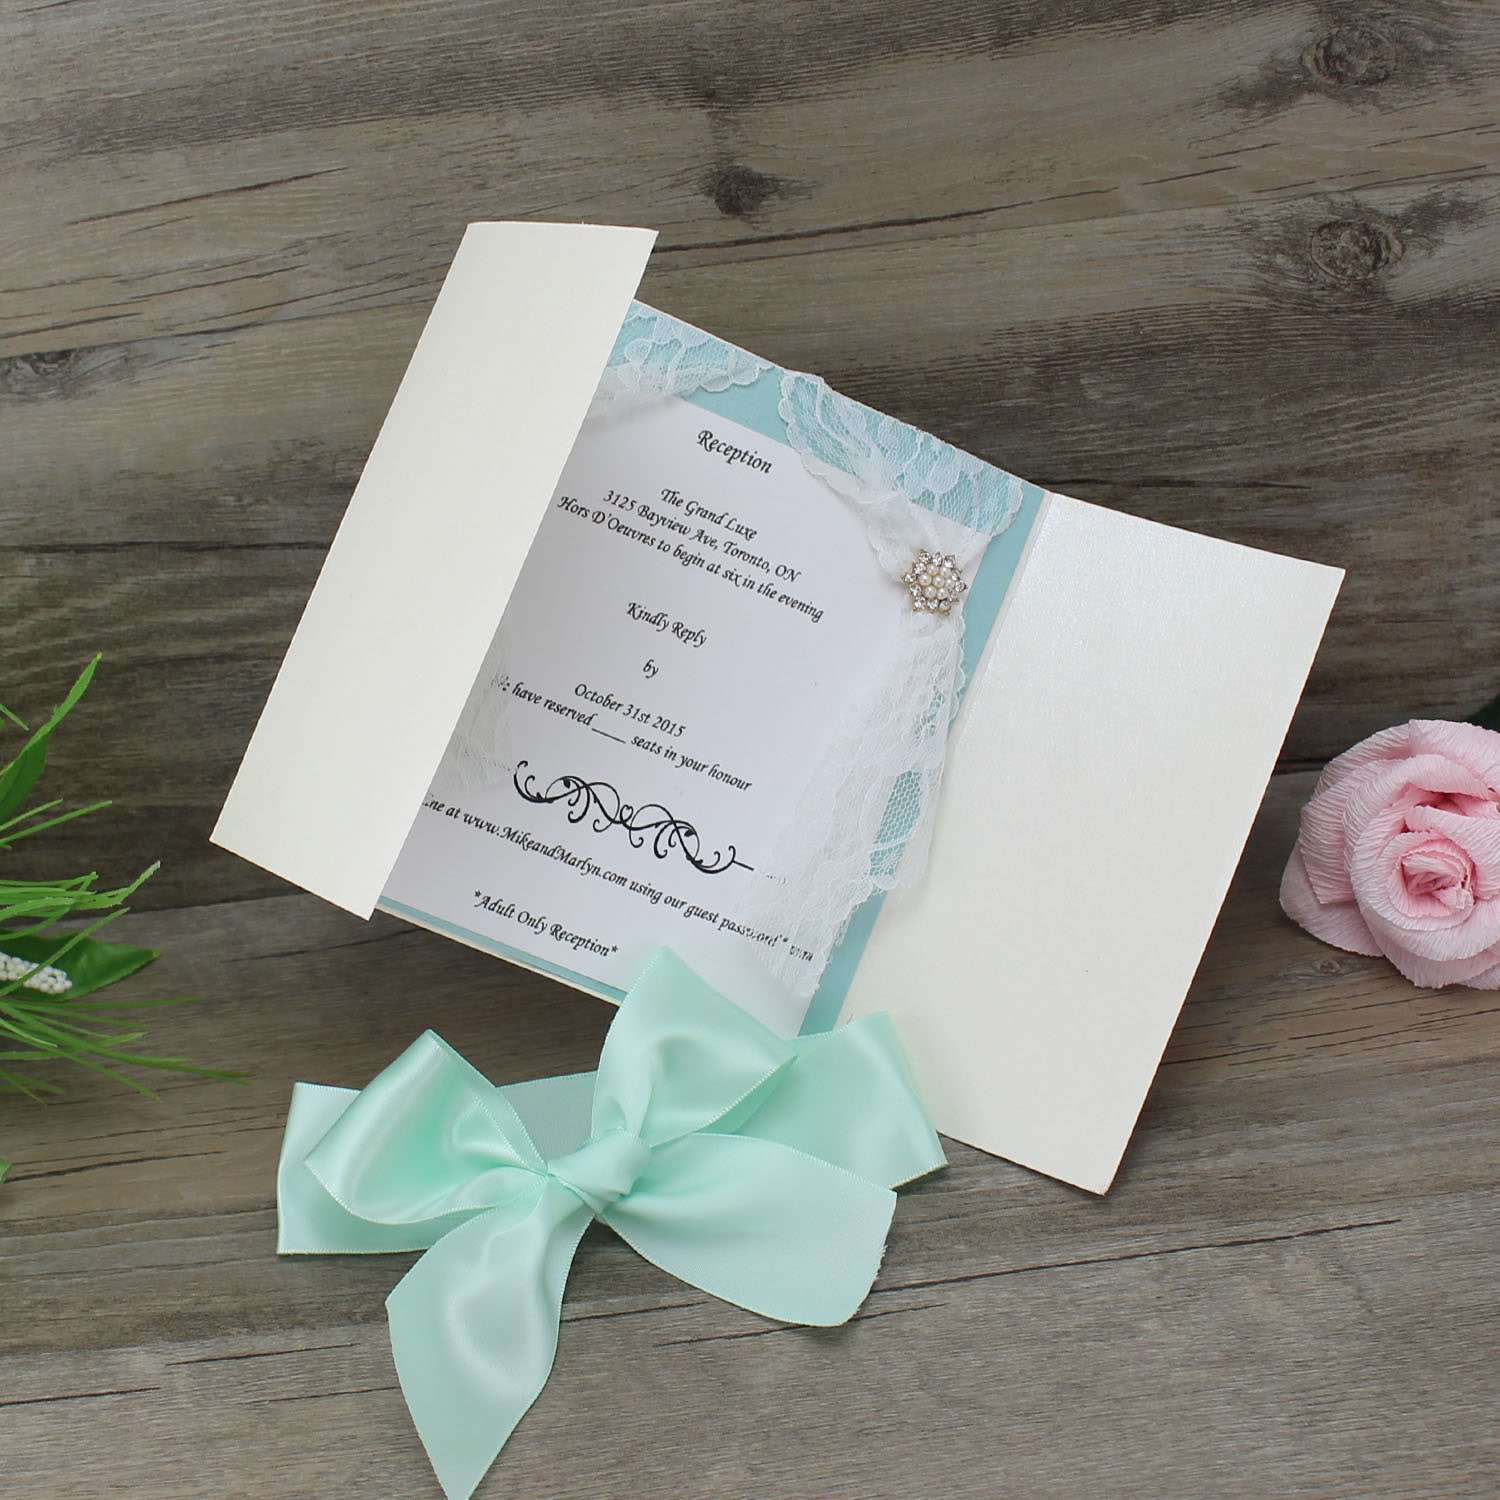 Gate Fold Invitation Card with Lace Decoration Wedding Card with Ribbon Bow